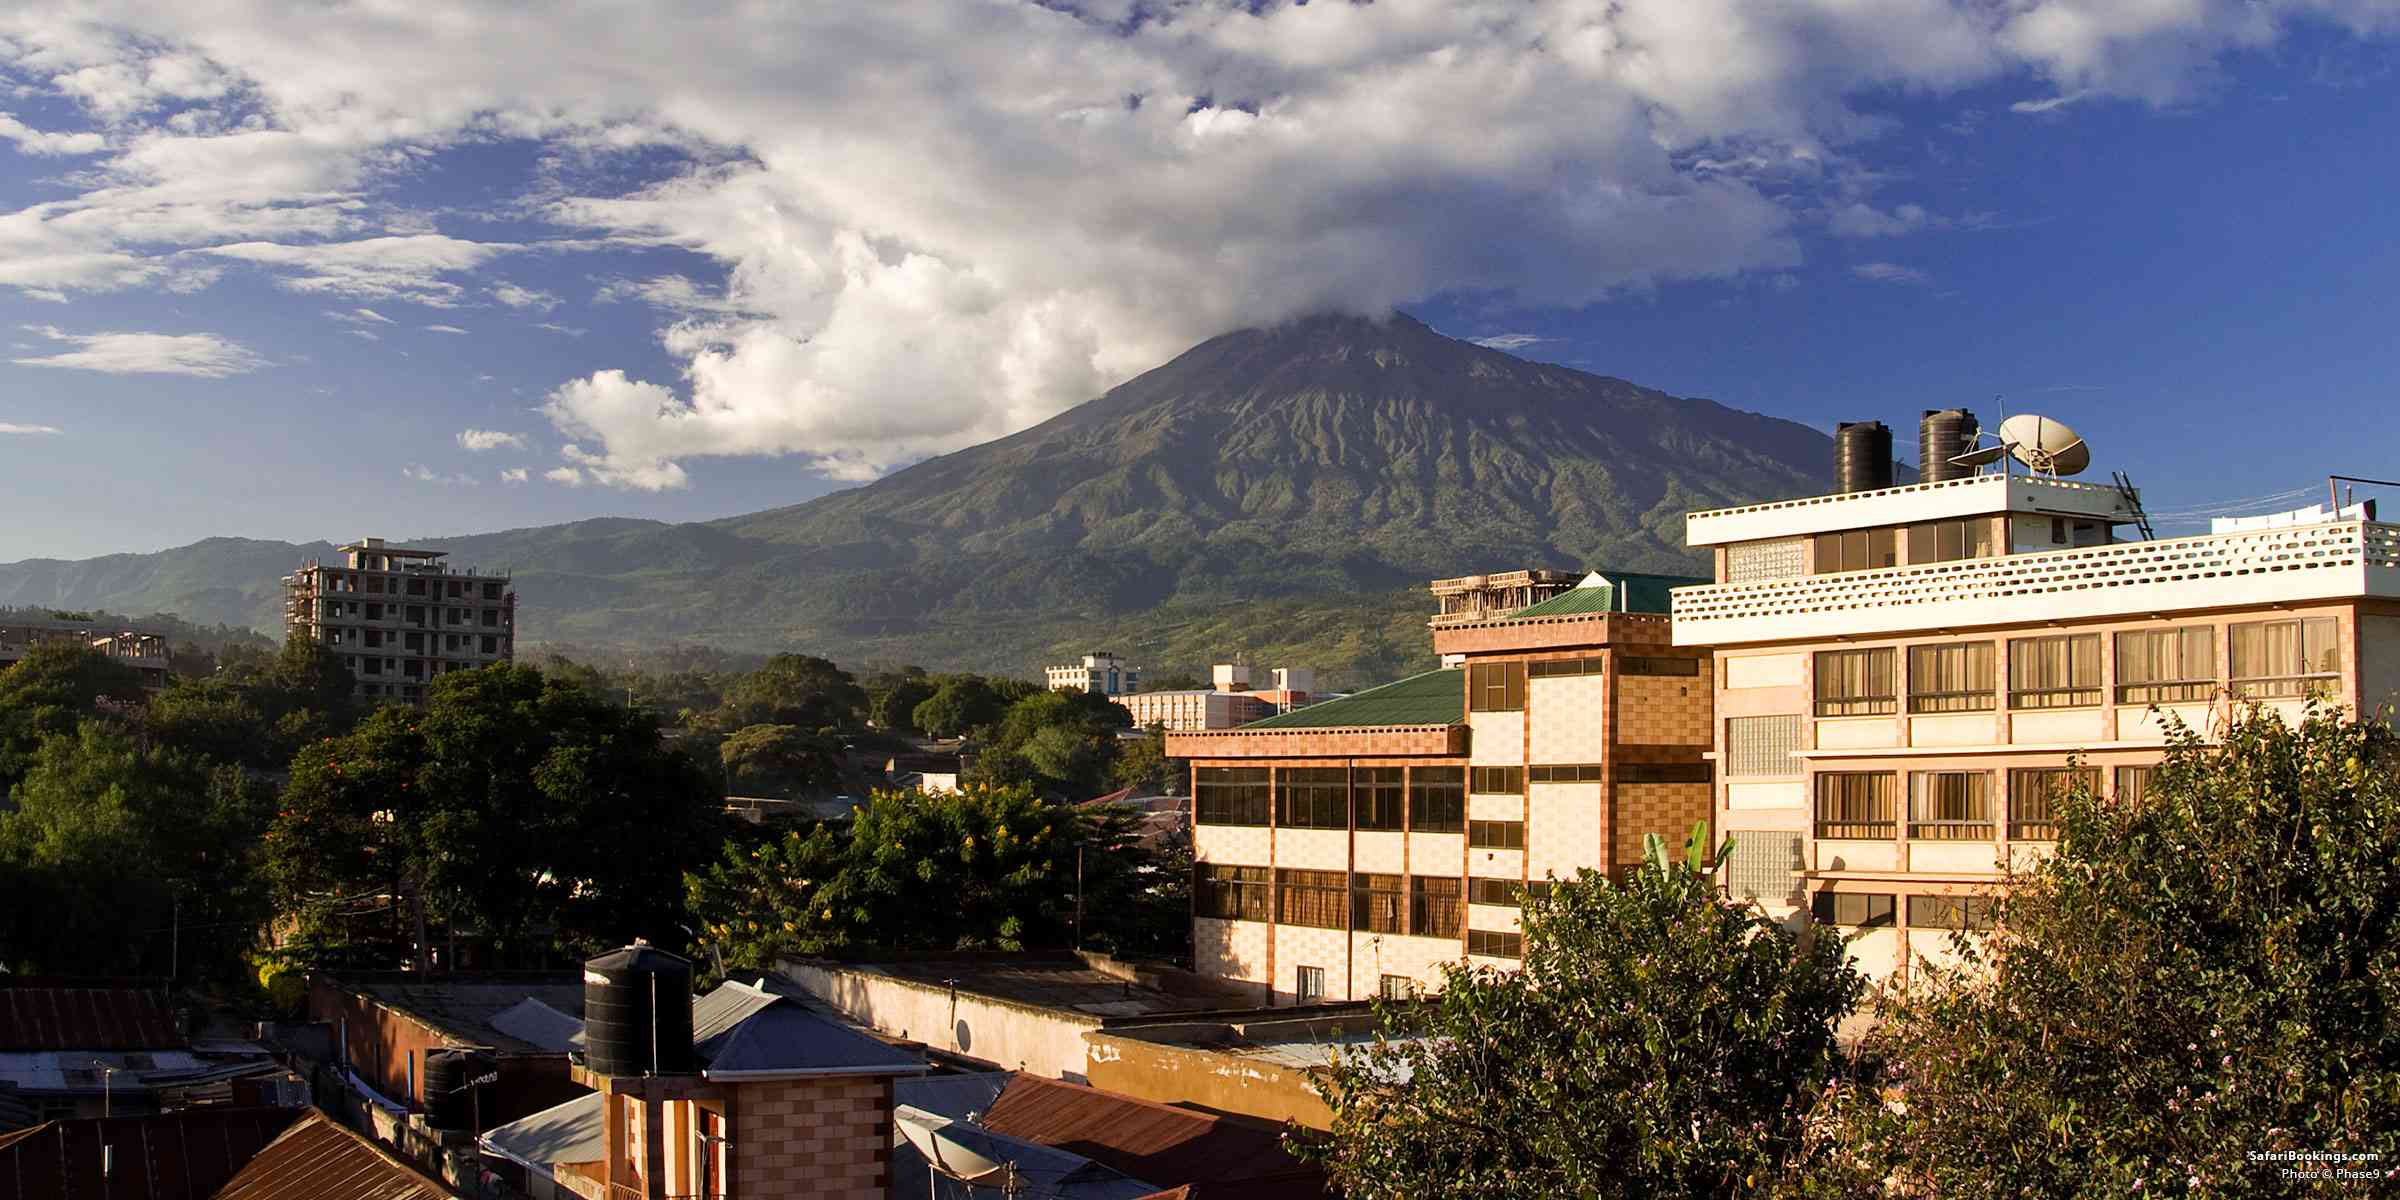 Top 9 Best Things to Do in Arusha